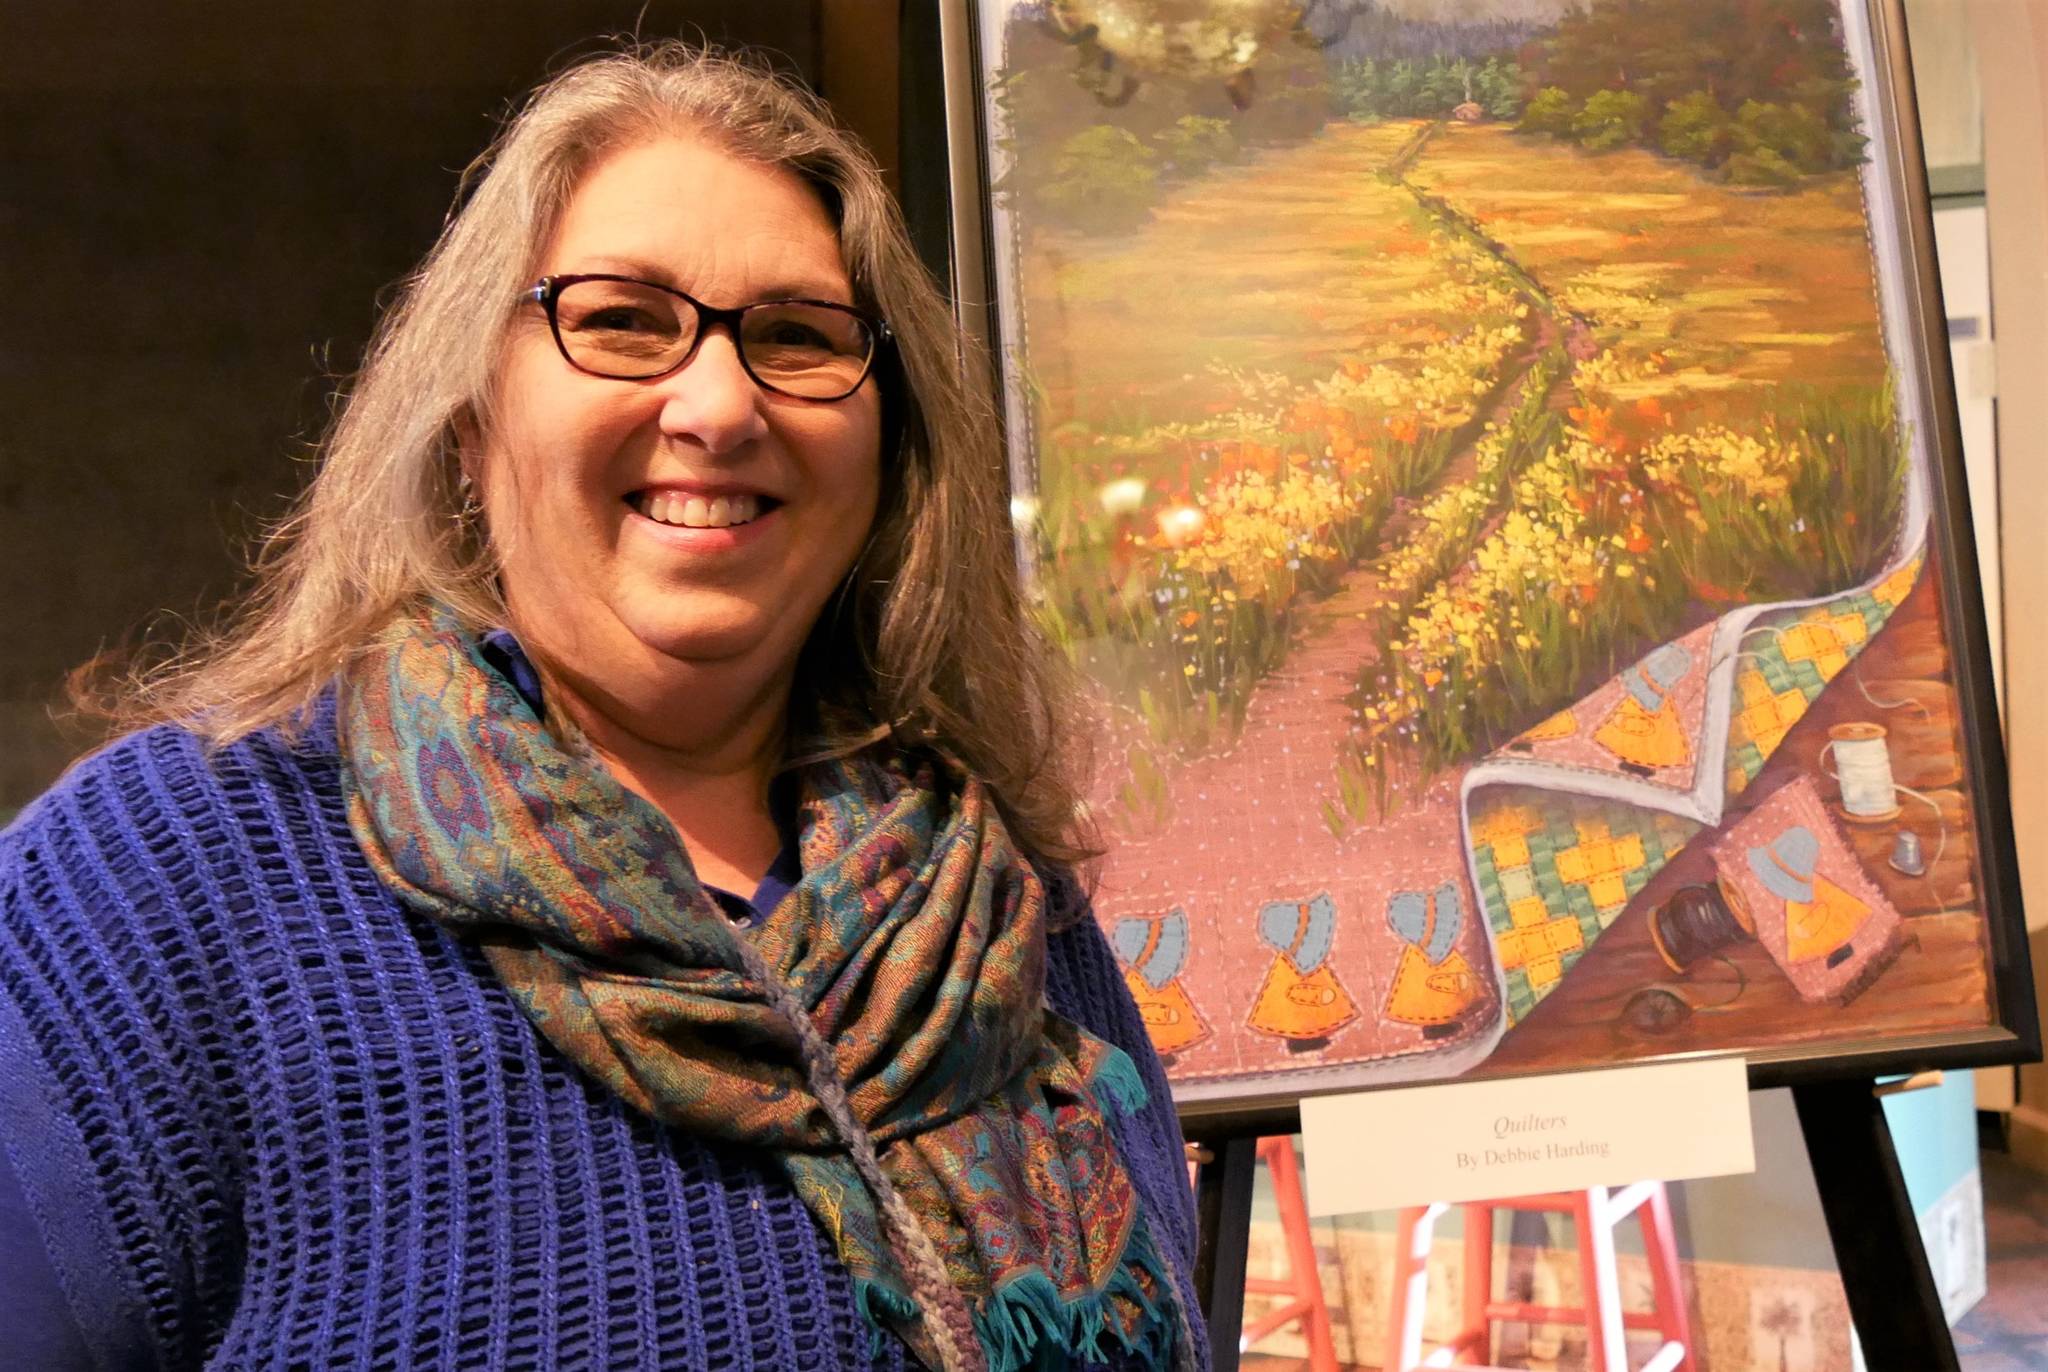 Local artist Debbie Harding displaying her artwork in a Gathering Hall event for Olympic Theatre Arts’ recent production of “Quilters.” Photo courtesy of Olympic Theatre Arts